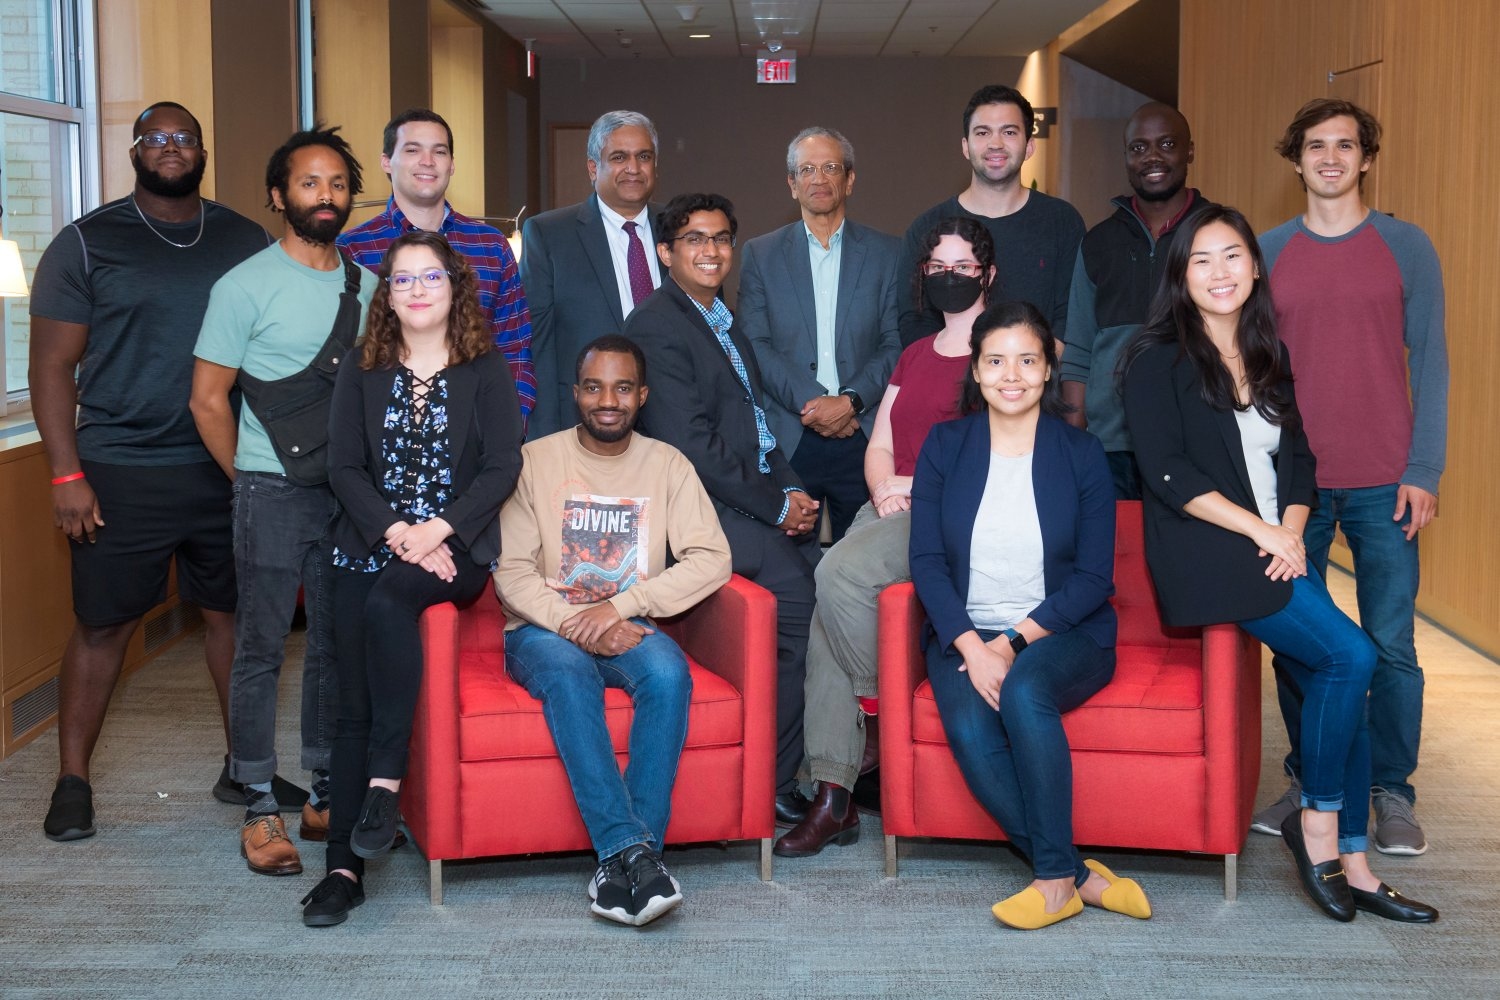 Back row, from left to right: Timothy Holder, George Moore, Jorge Méndez, Dean Anantha Chandrakasan, Associate Dean Daniel Hastings, Matthew Rivera, Joseph Wasswa, and Steven Ceron. Front and middle rows, seated, from left to right: Maria Ramos Gonzalez, Michael Kitcher, Suhas Eswarappa Prameela, Molly Carton, Sofia Arevalo, and Ulri Lee. Not pictured: Matthew Clarke, Amy Fox, Kristina Monakhova, and Kimia Nadjahi.